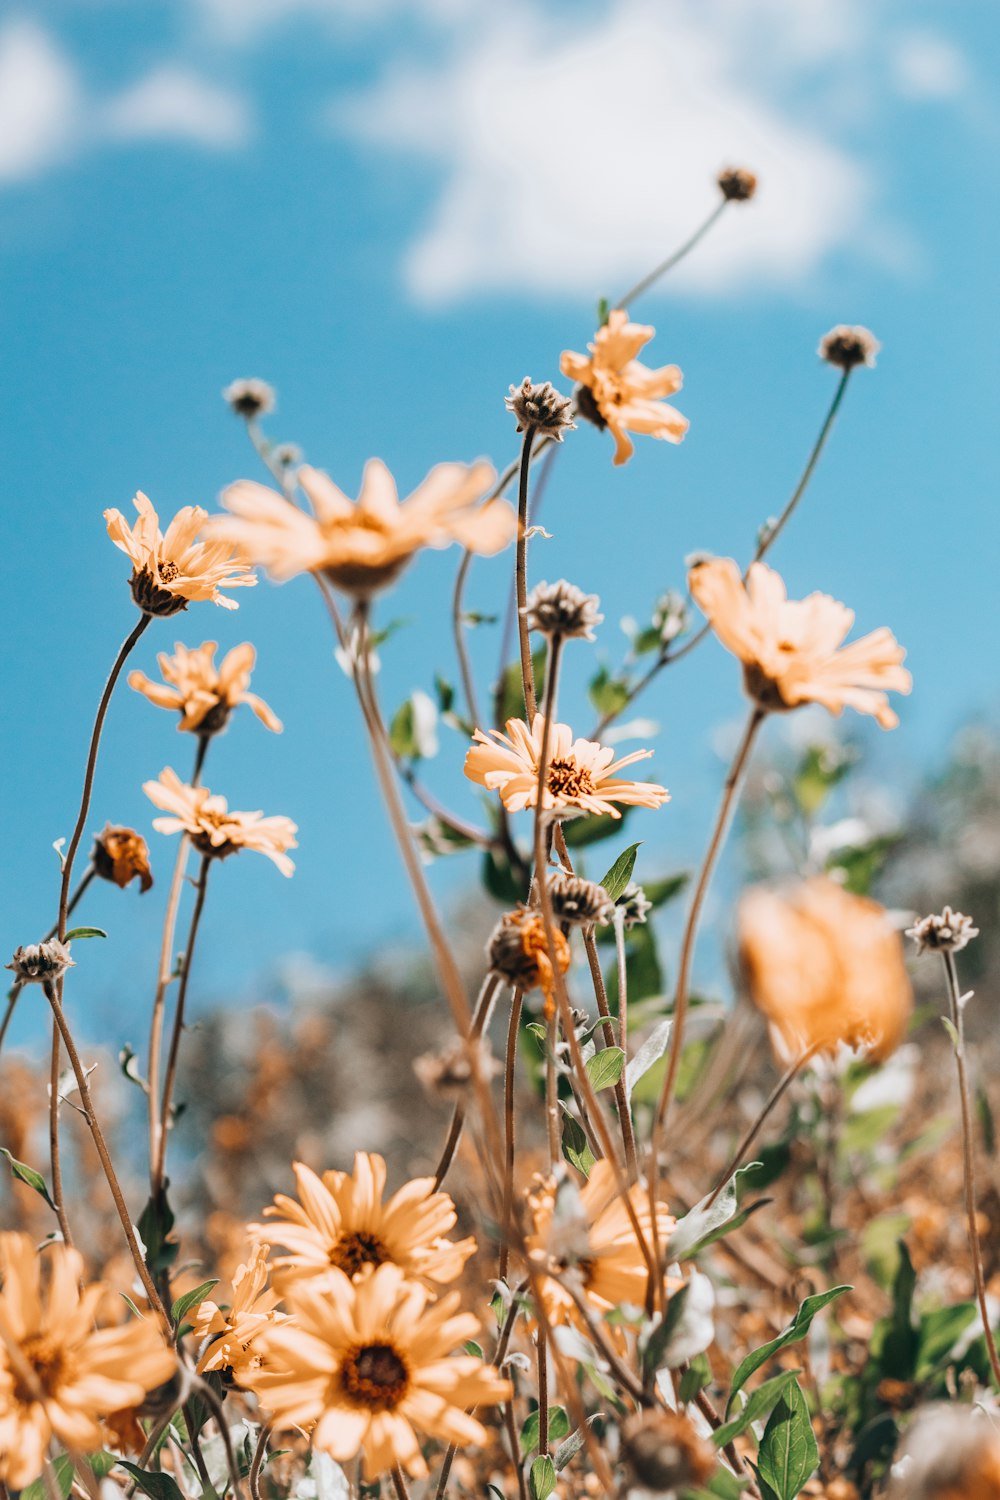 450+ Wild Flower Pictures  Download Free Images on Unsplash